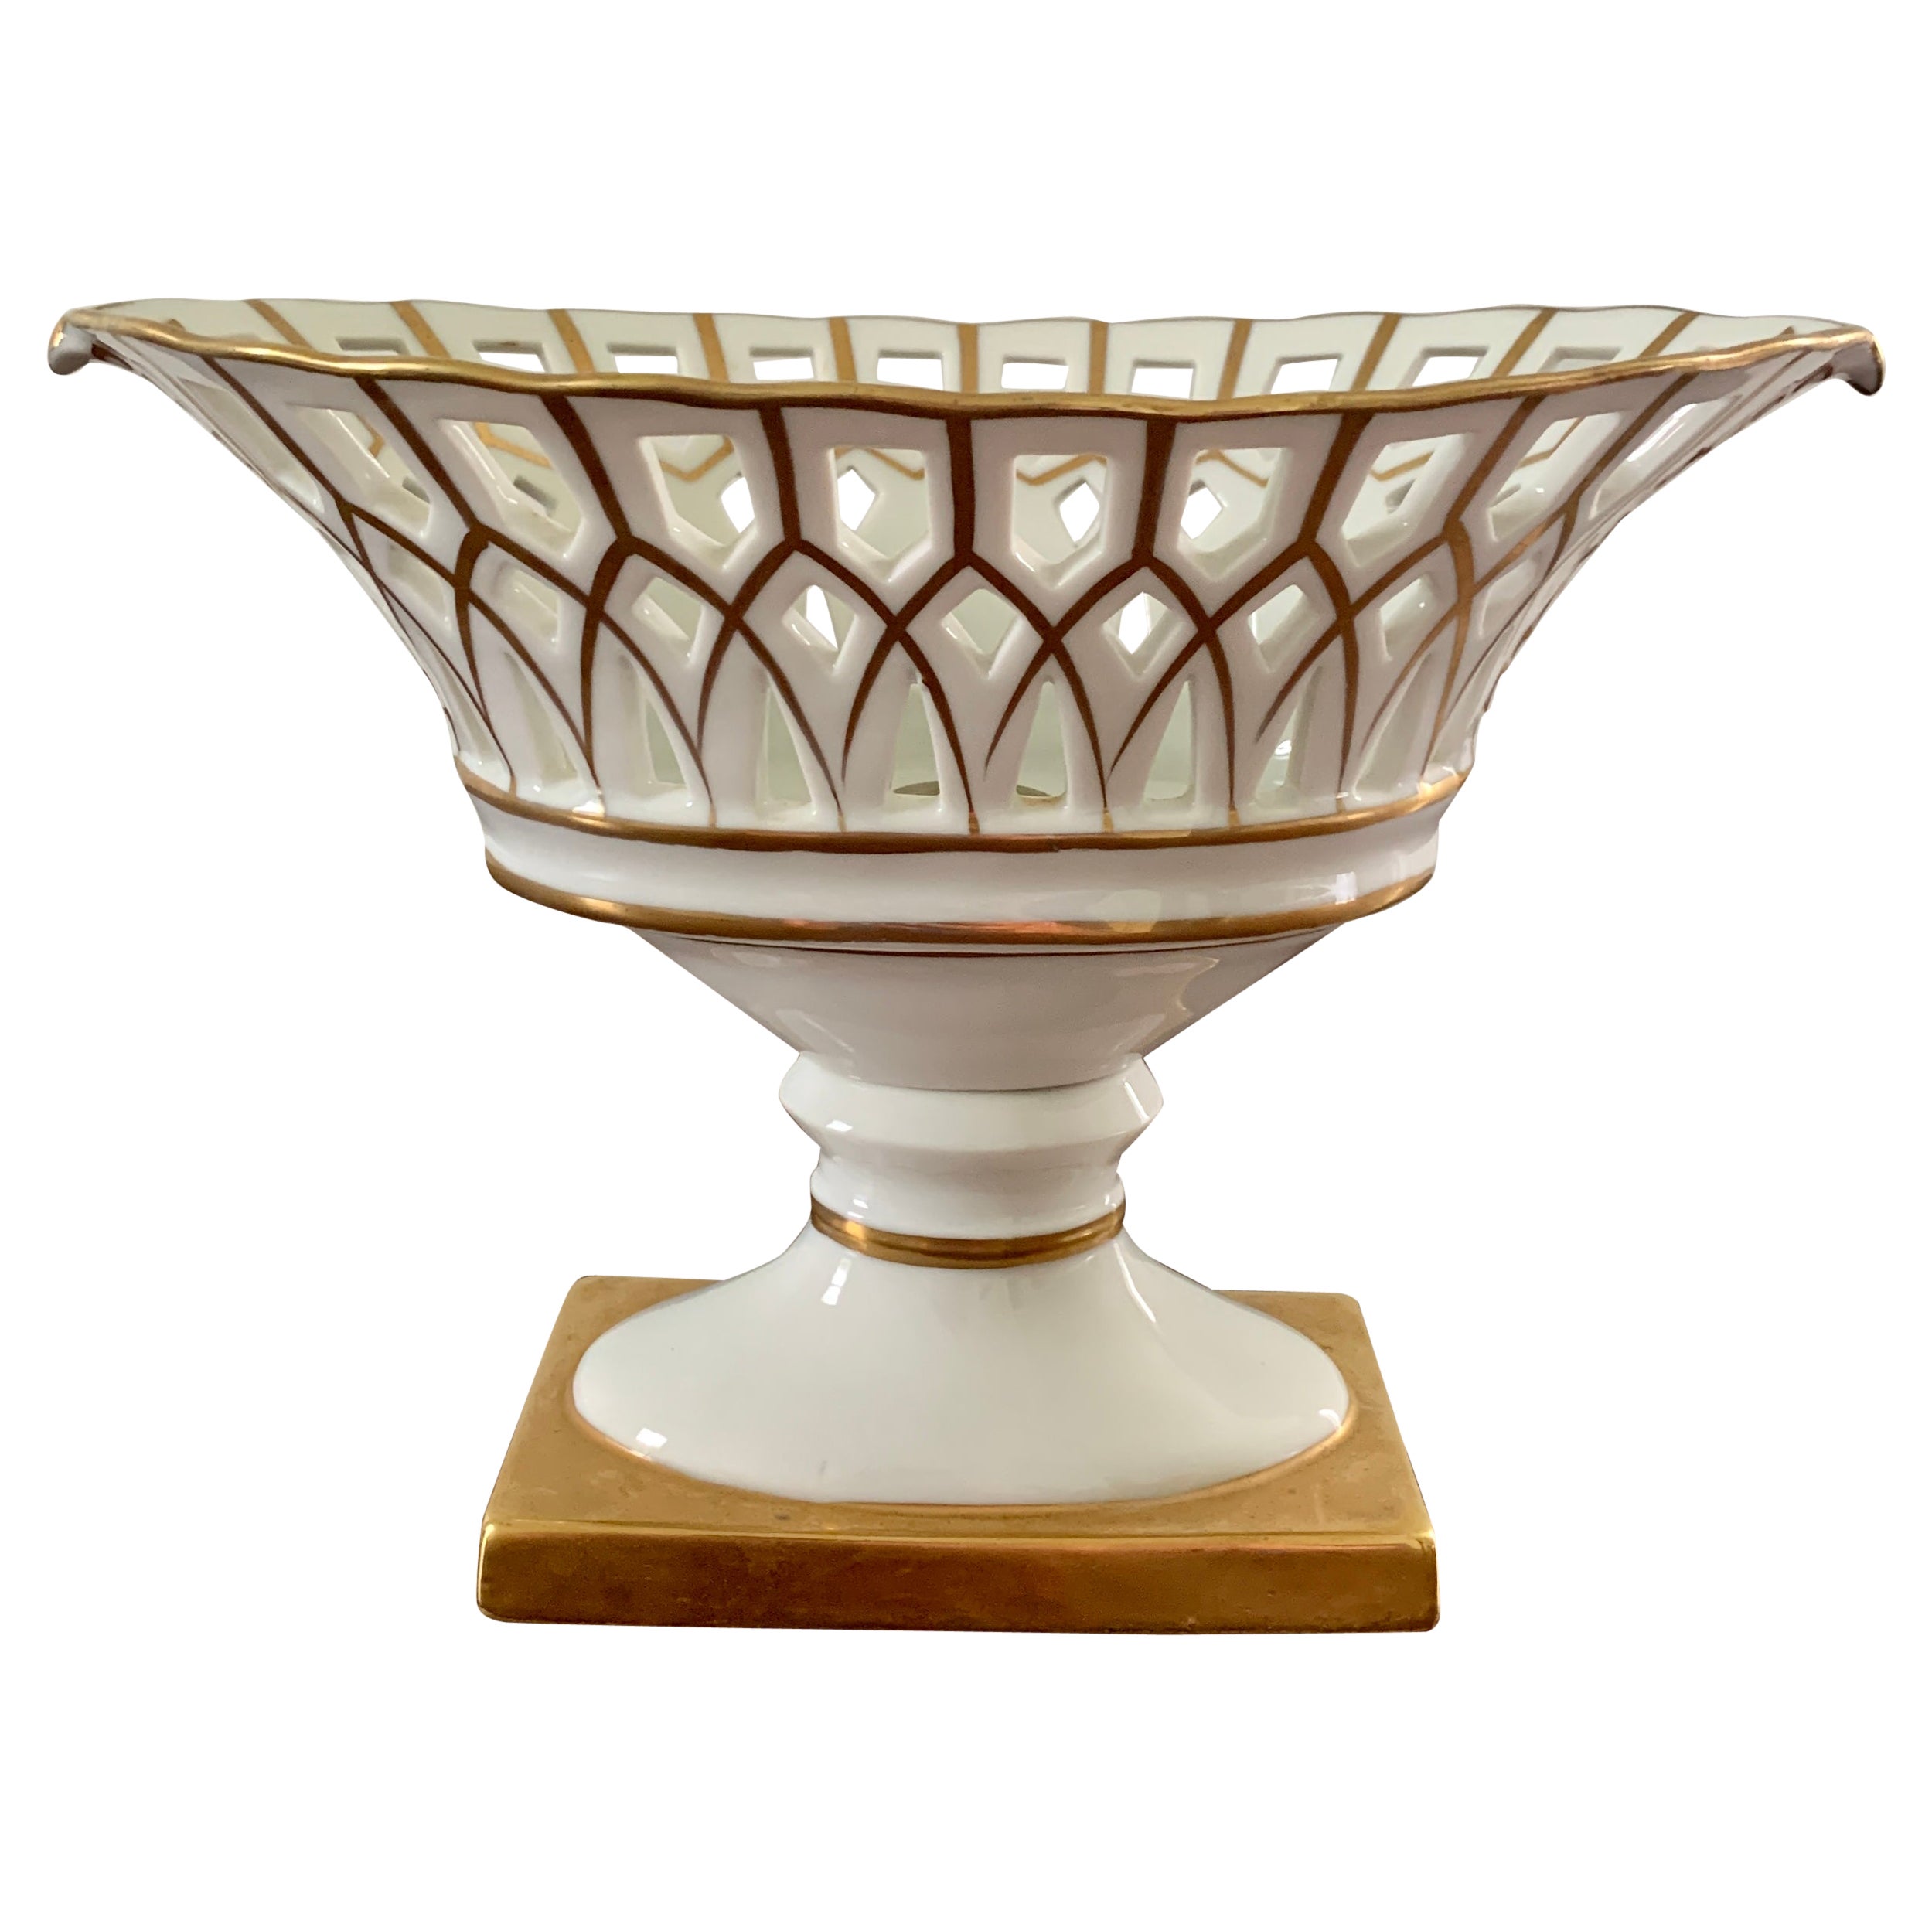 Reticulated Regency White Porcelain and Gold Gilt Basket Compote